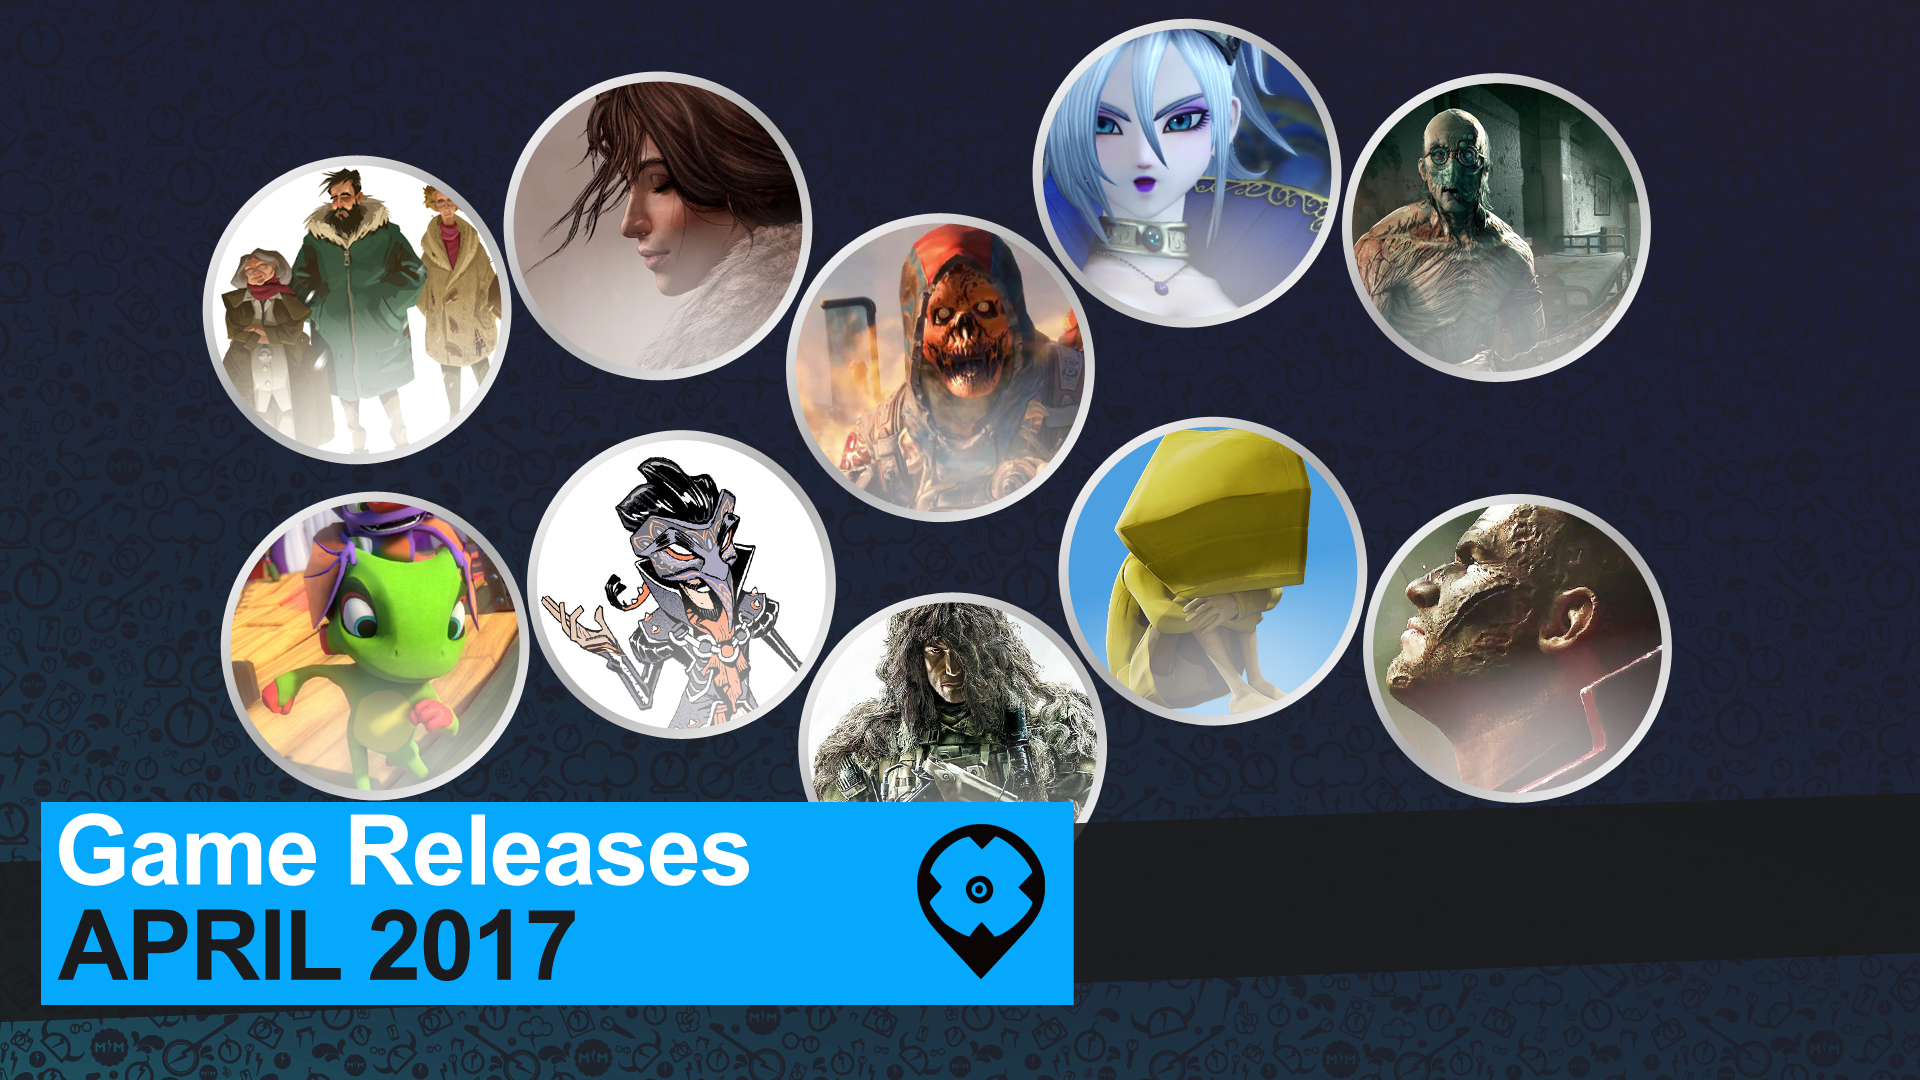 Check Out The April 2017 Game Releases!